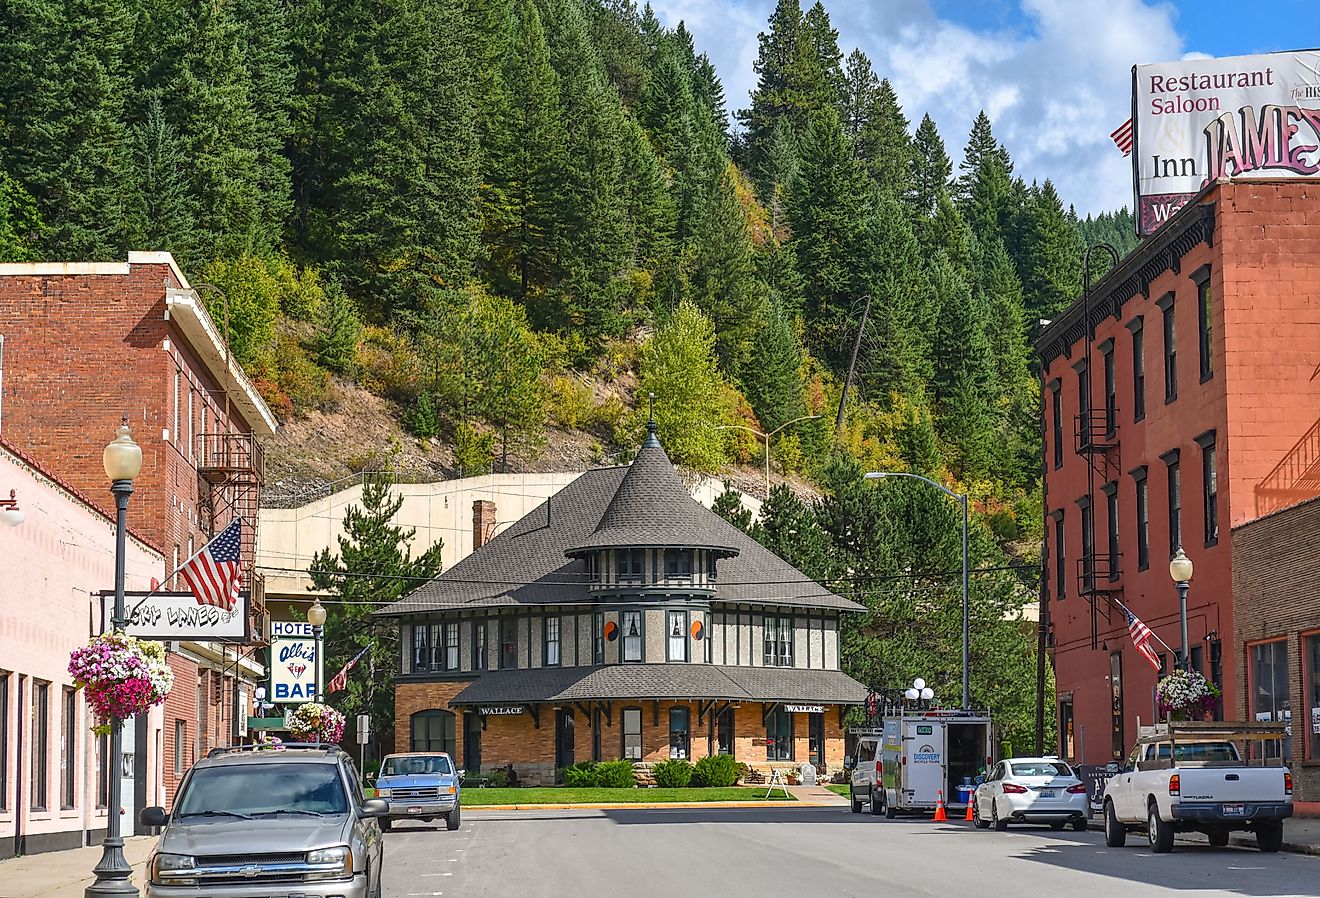 Railroad Museum in the Old West mining town of Wallace, Idaho. Image credit Kirk Fisher via Shutterstock